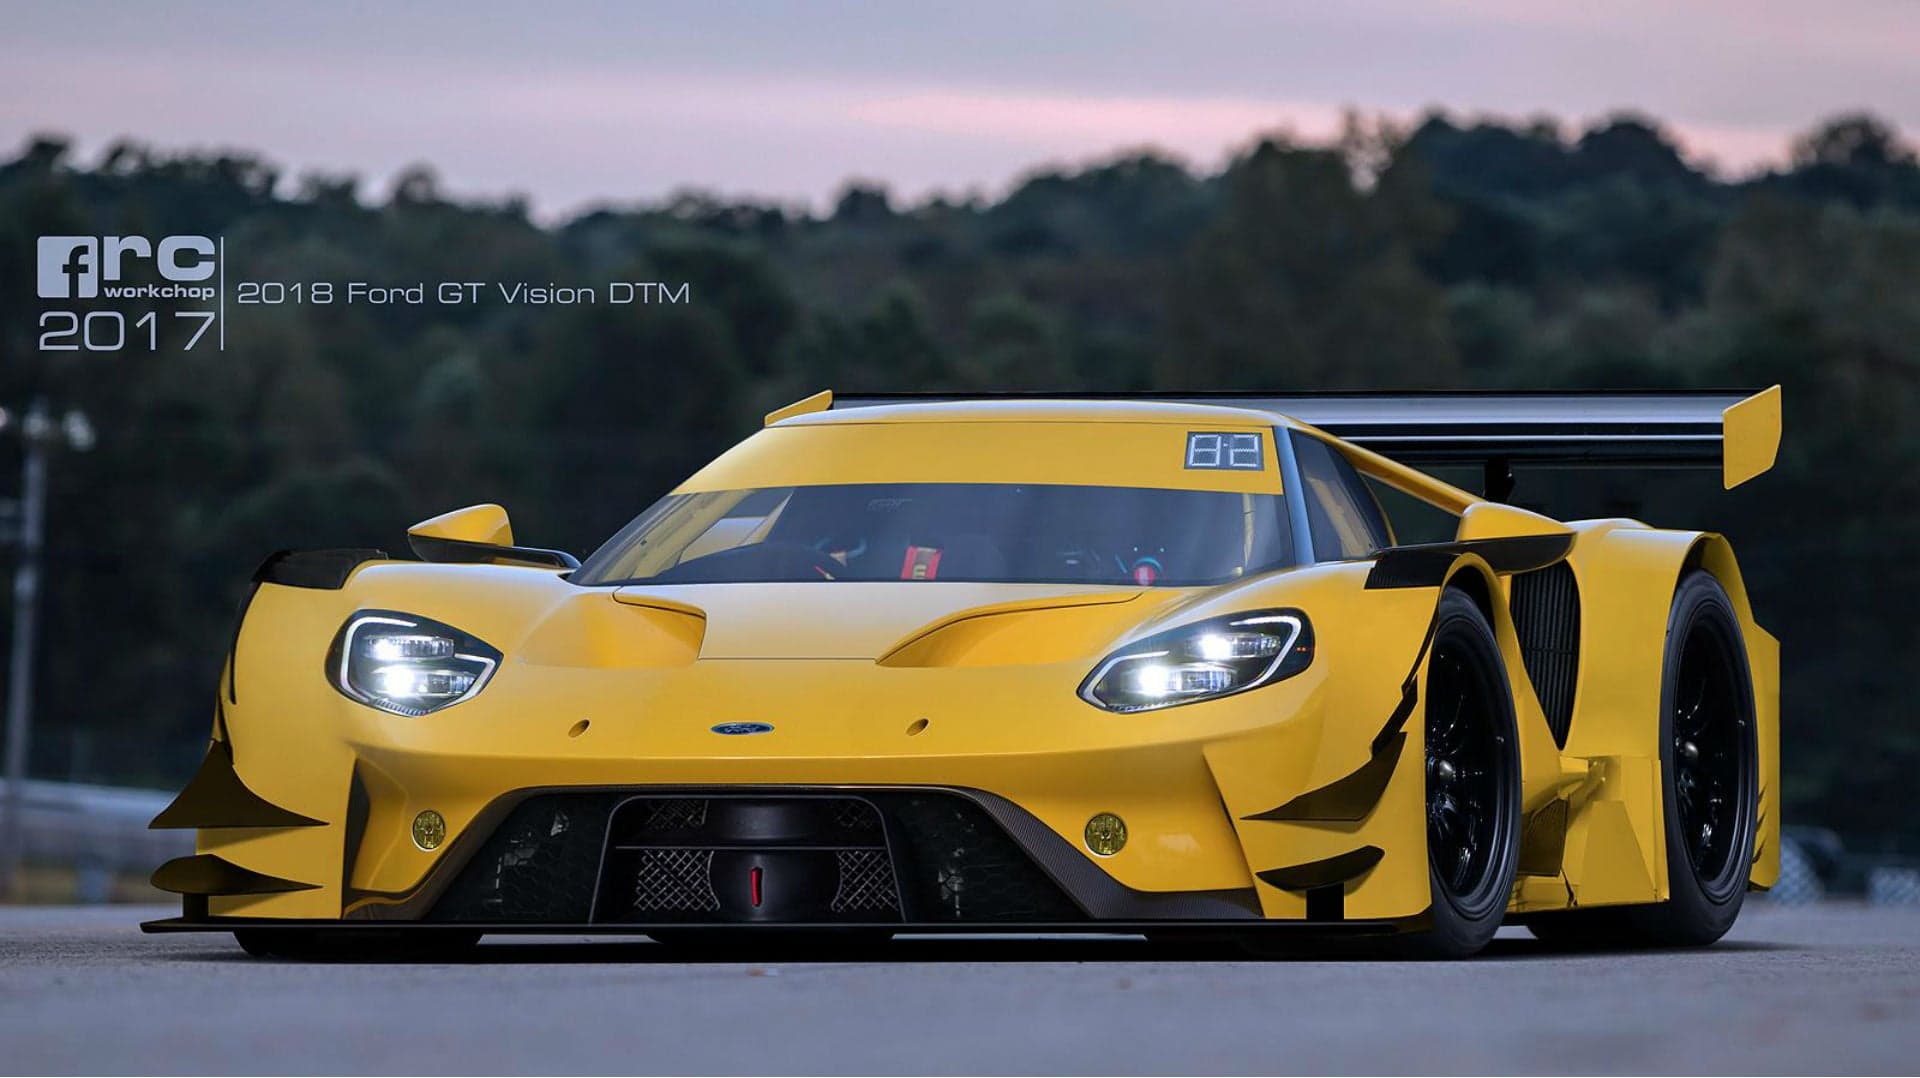 The 2018 Ford GT Looks Wicked When Reimagined as a DTM Racer